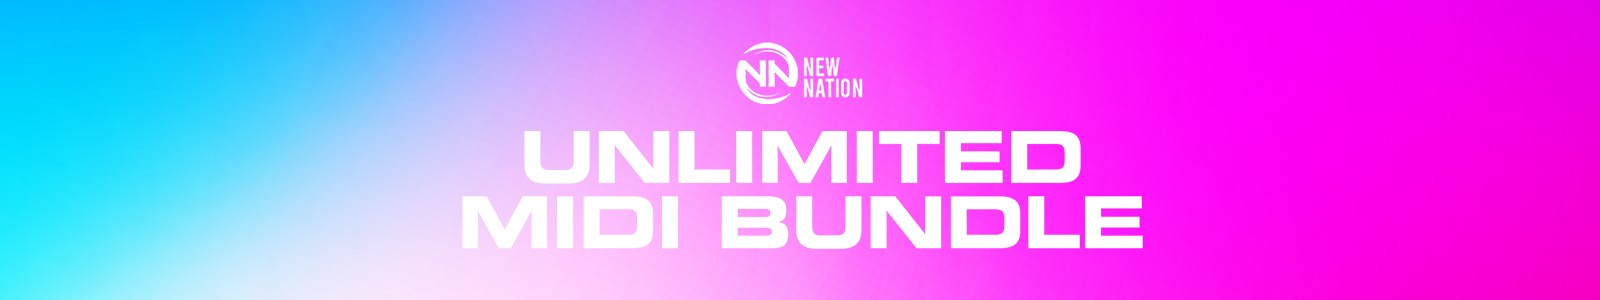 Unlimited MIDI Bundle by New Nation